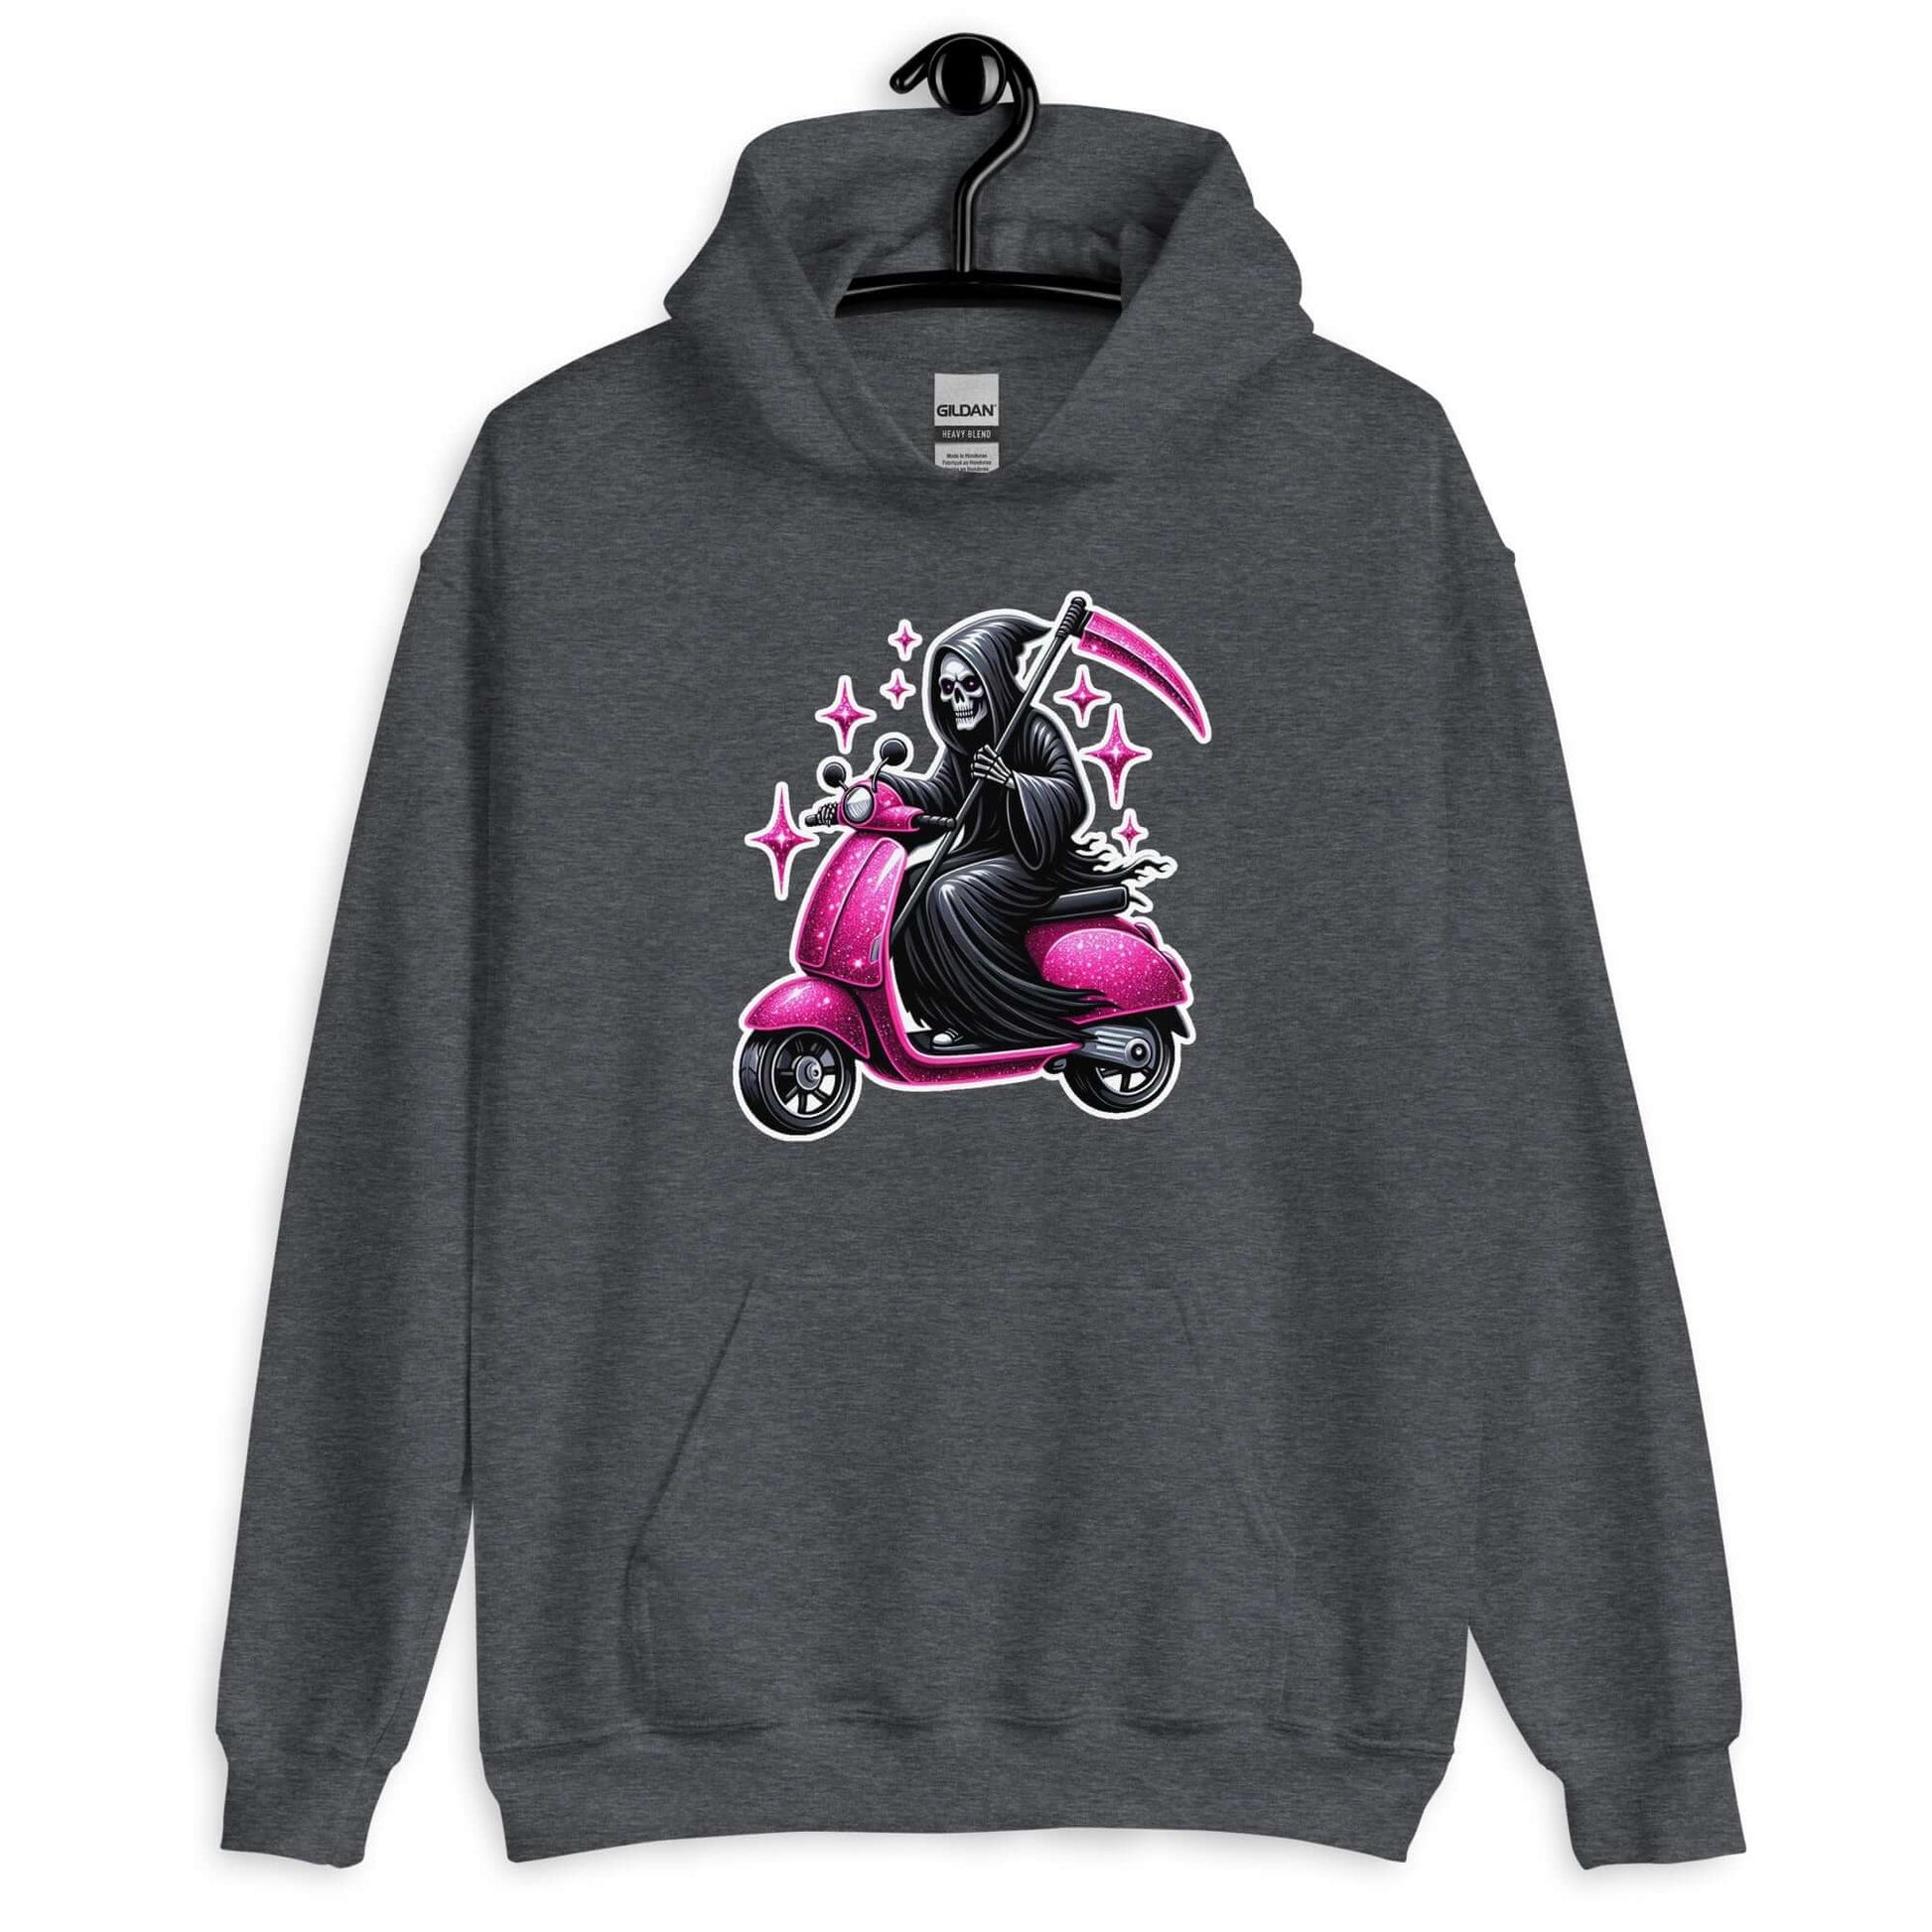 Dark heather grey hoodie sweatshirt with funny image of the Grim Reaper riding on a glam pink scooter printed on the front.